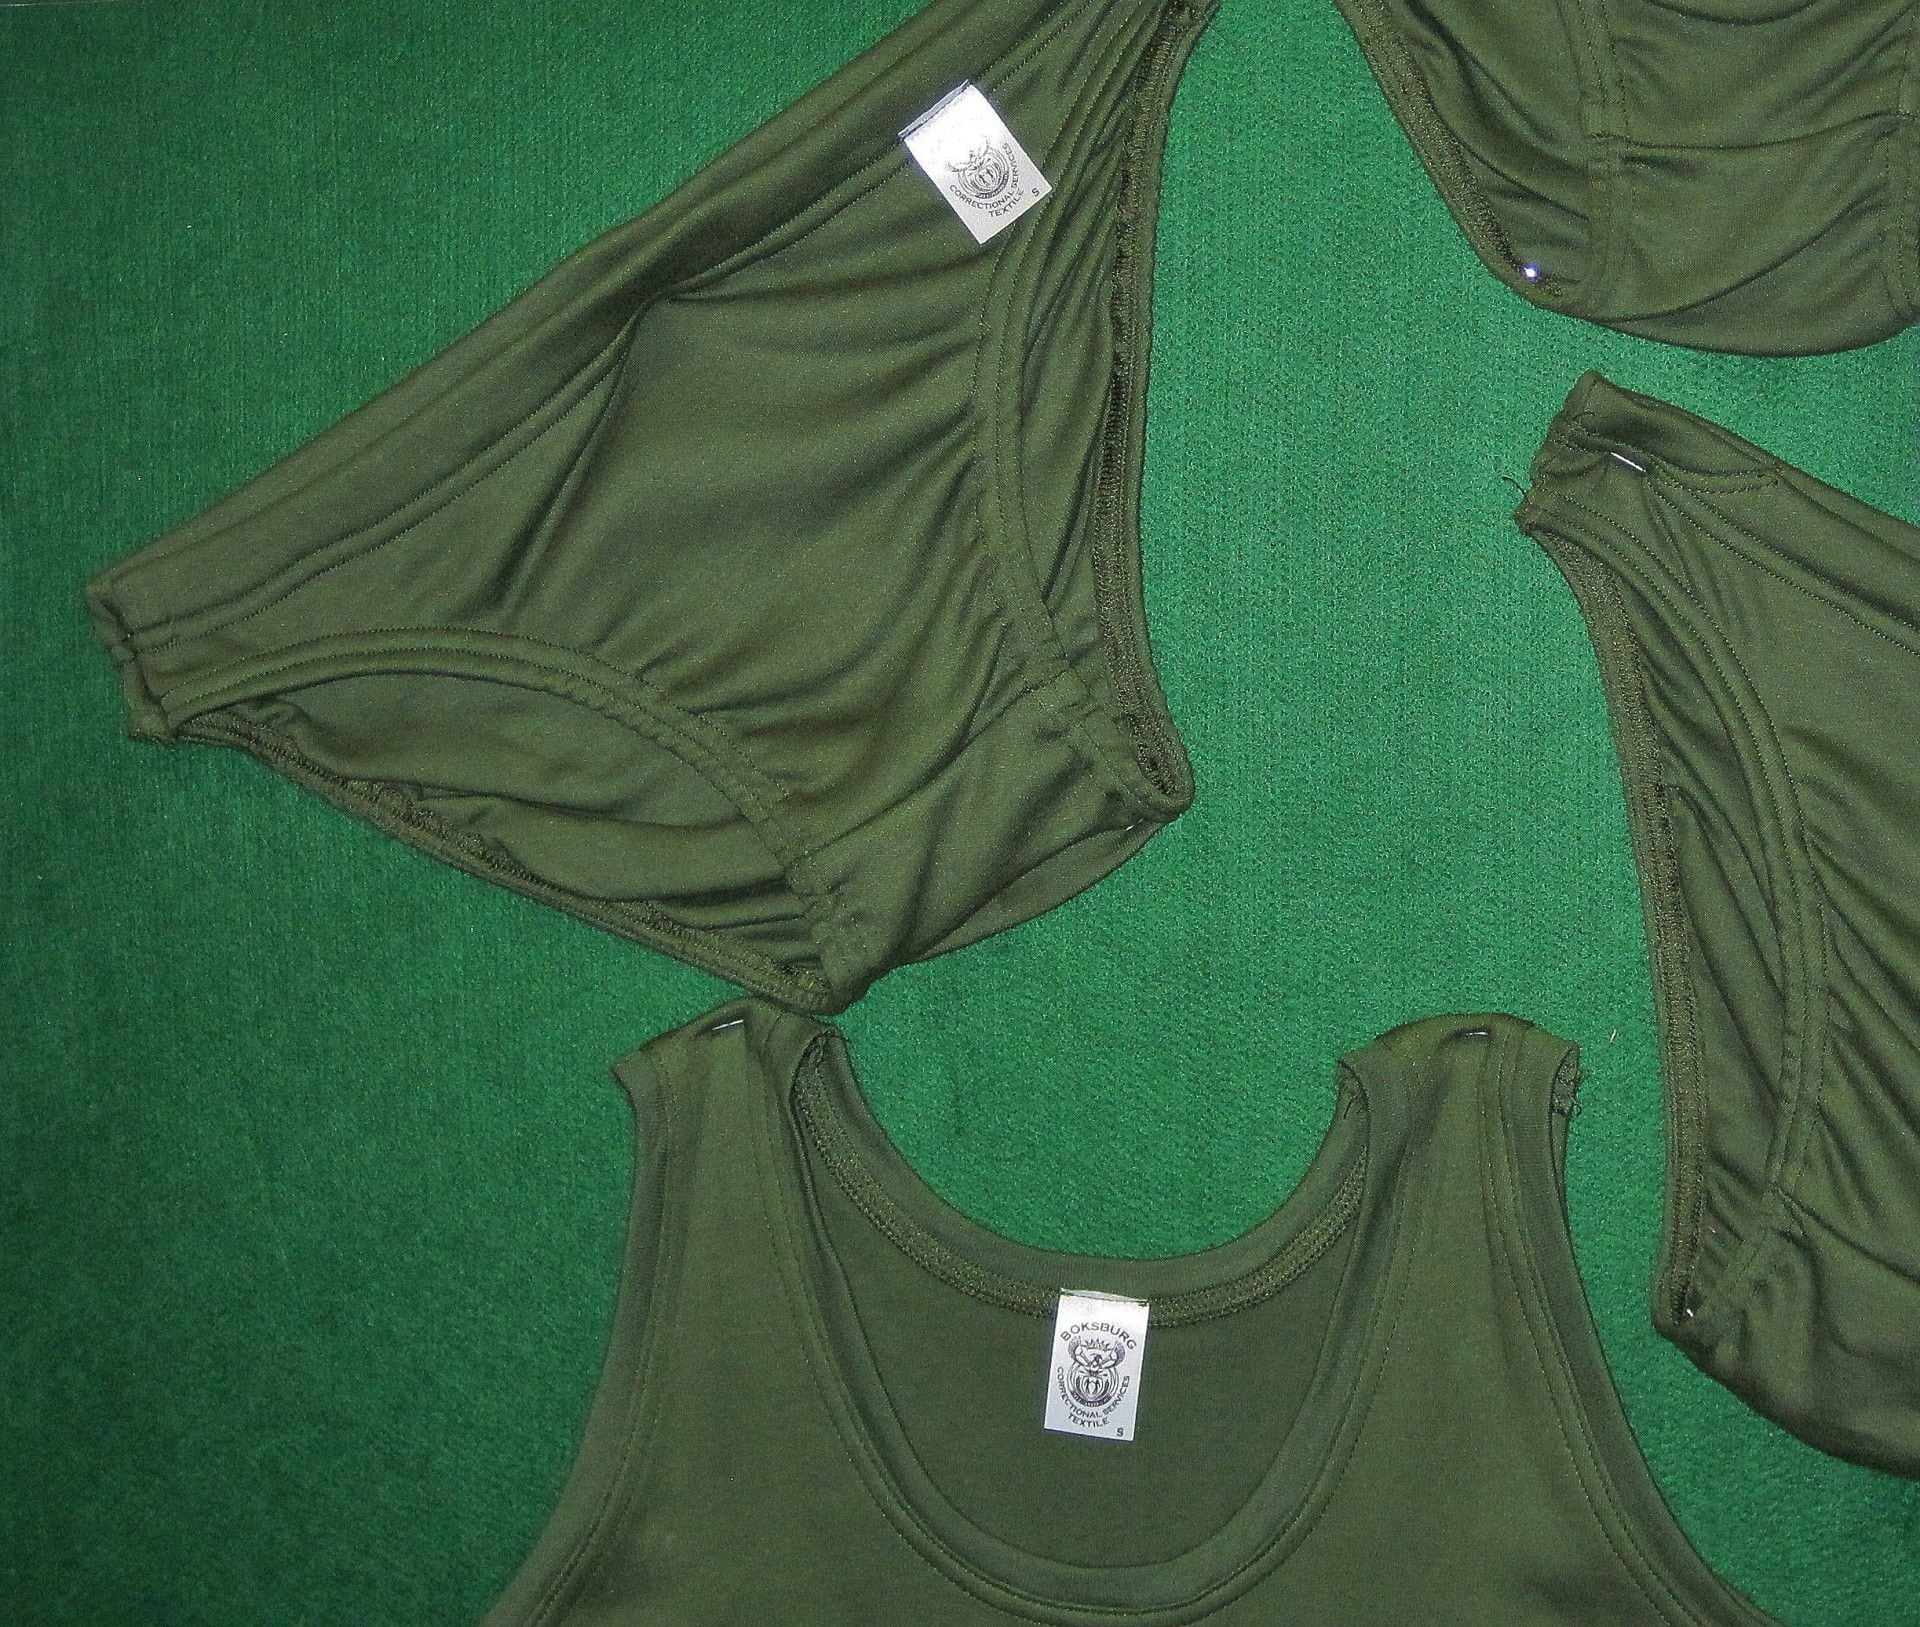 Why troops are going commando